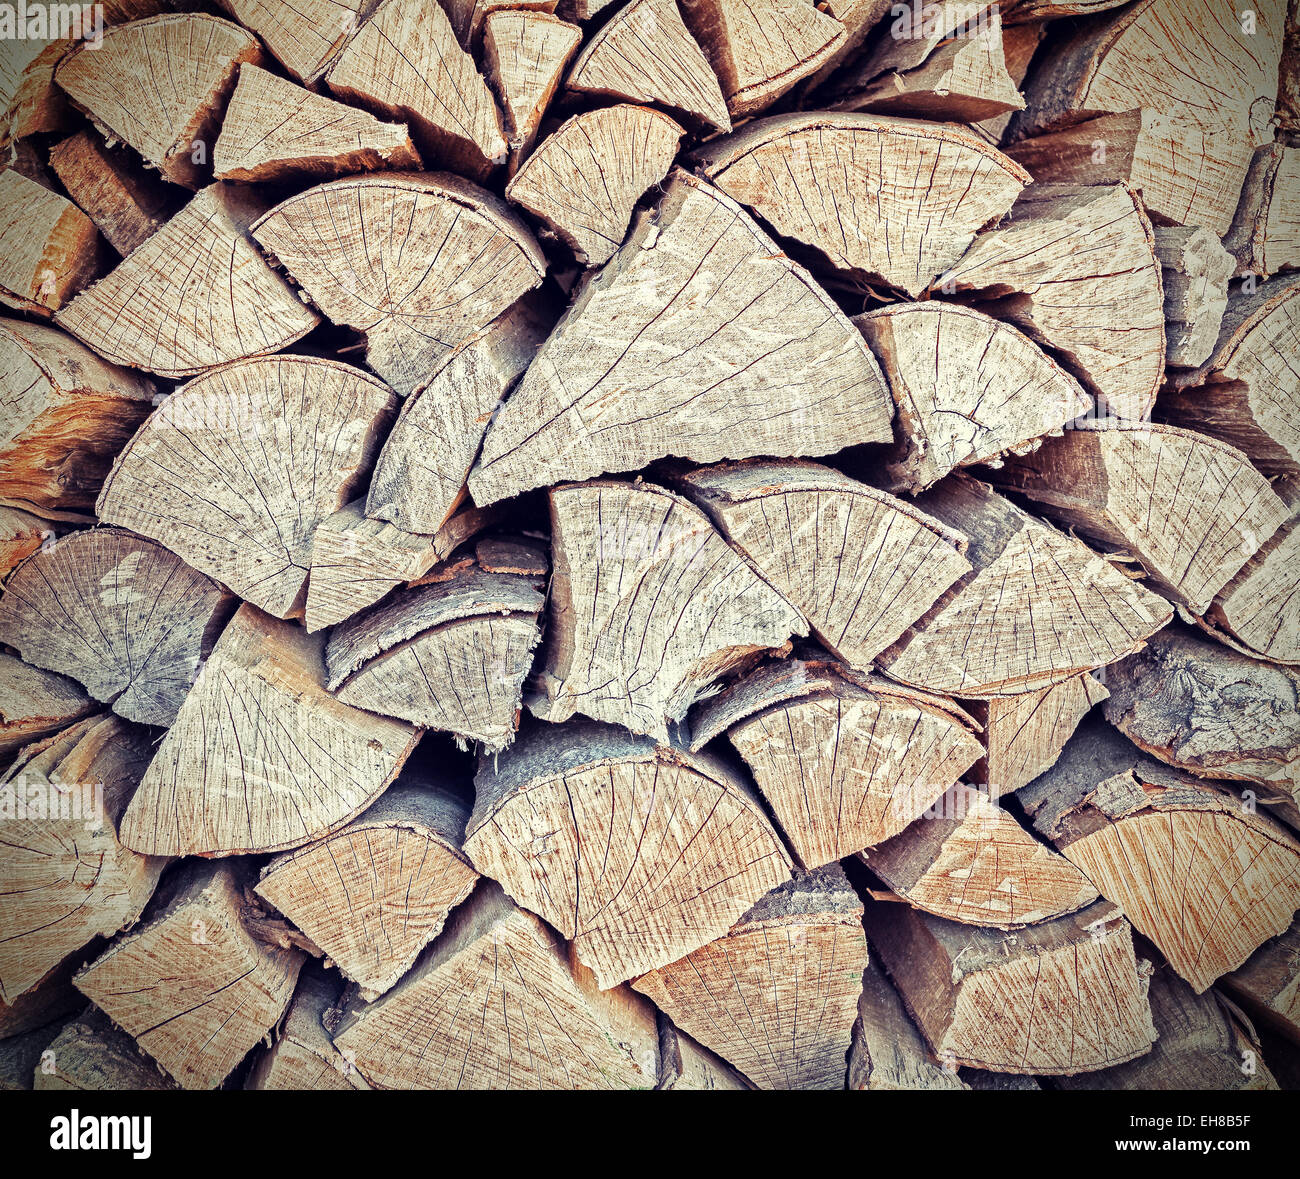 Background or texture made of firewood. Stock Photo